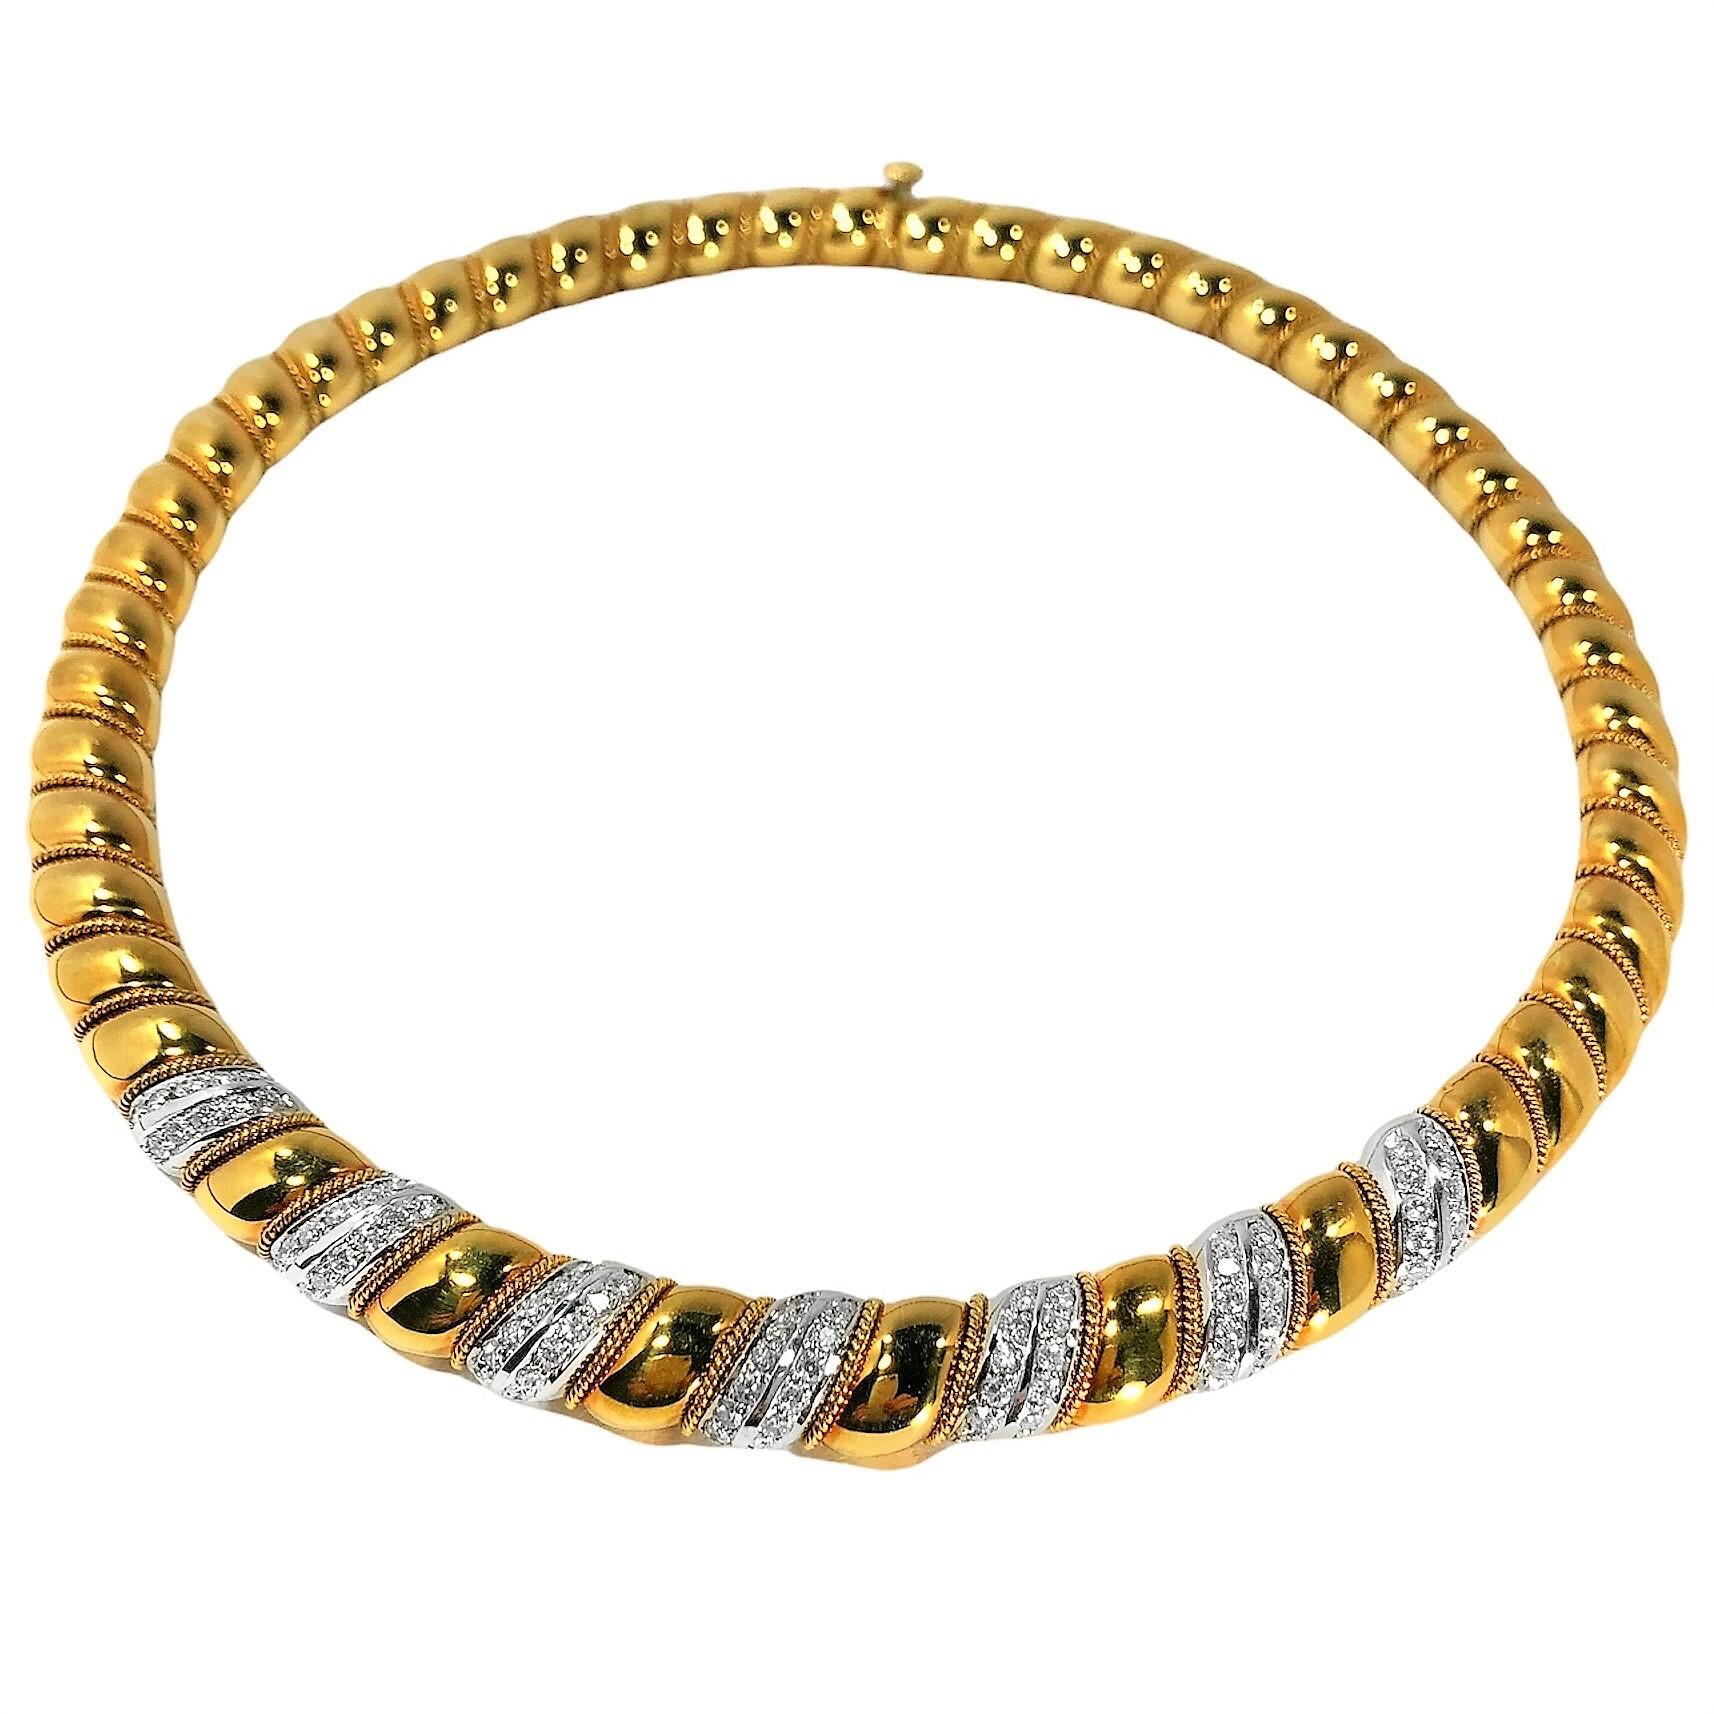 Crafted from 18k white and yellow gold during the late-20th century, this exquisite Sabbadini necklace has the rich patina of age. Each slightly puffed link from front to back is edged with a delicate line of 18k rope, and seven white gold links at